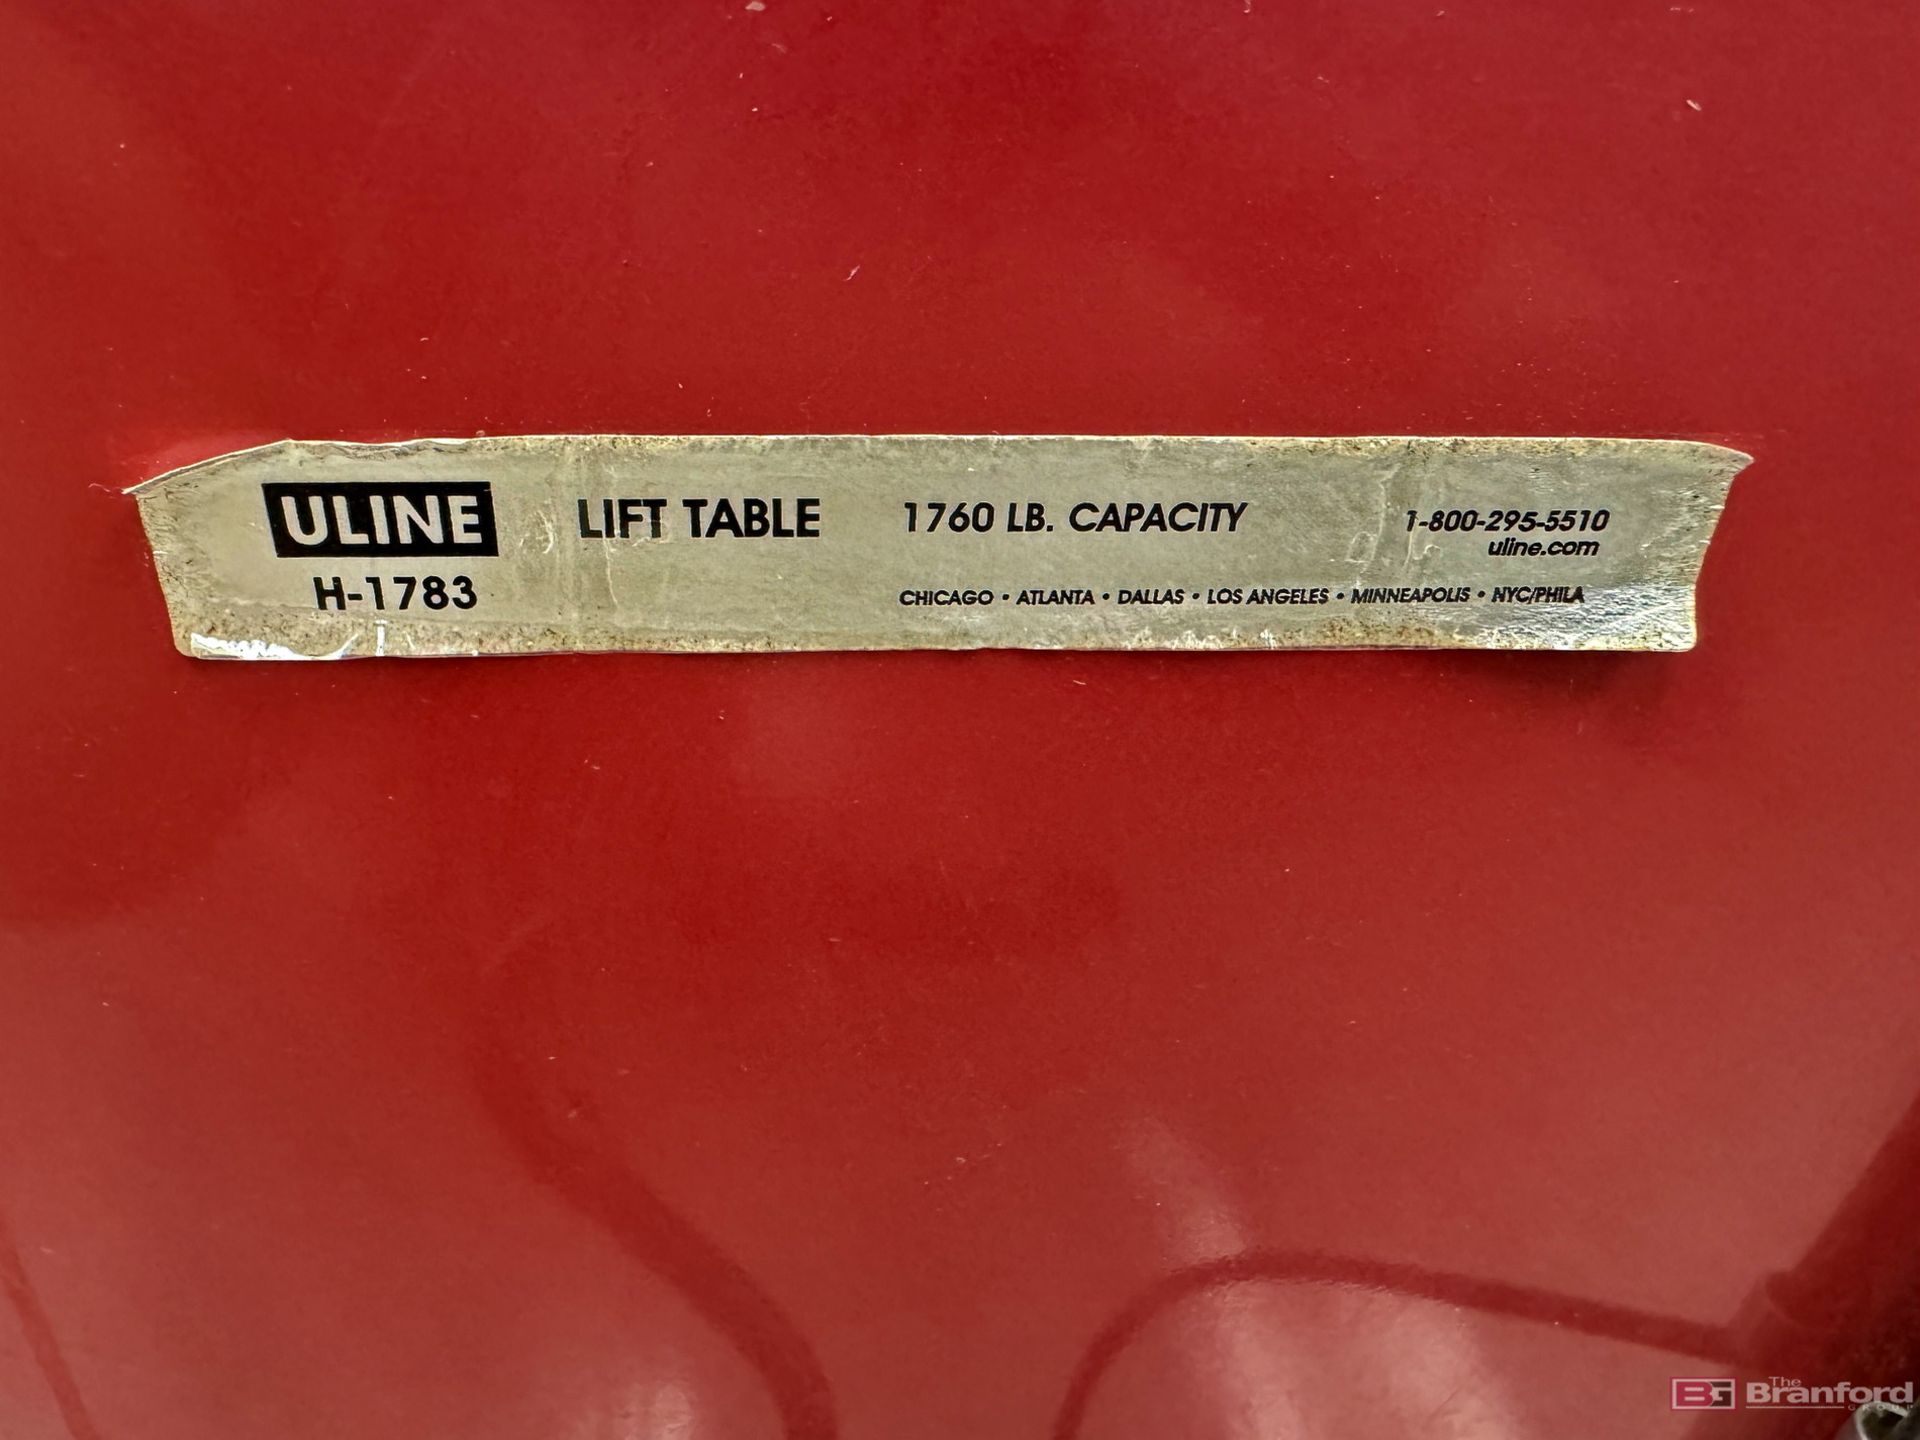 Uline lift table H-1783, 1760 lb capacity - Image 3 of 5